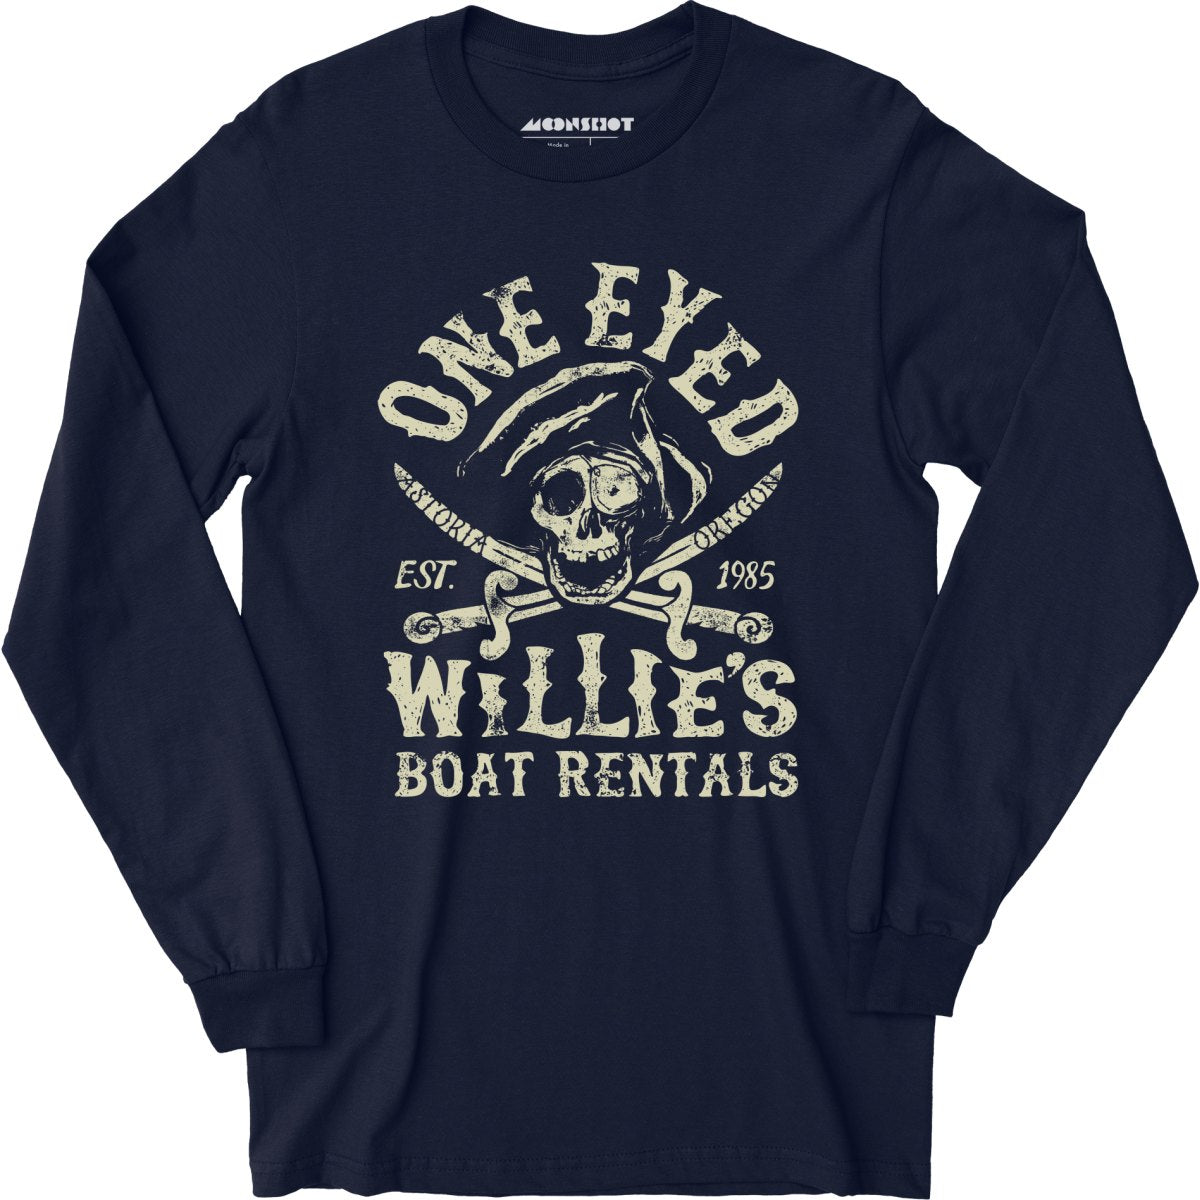 One Eyed Willie's Boat Rentals - Long Sleeve T-Shirt